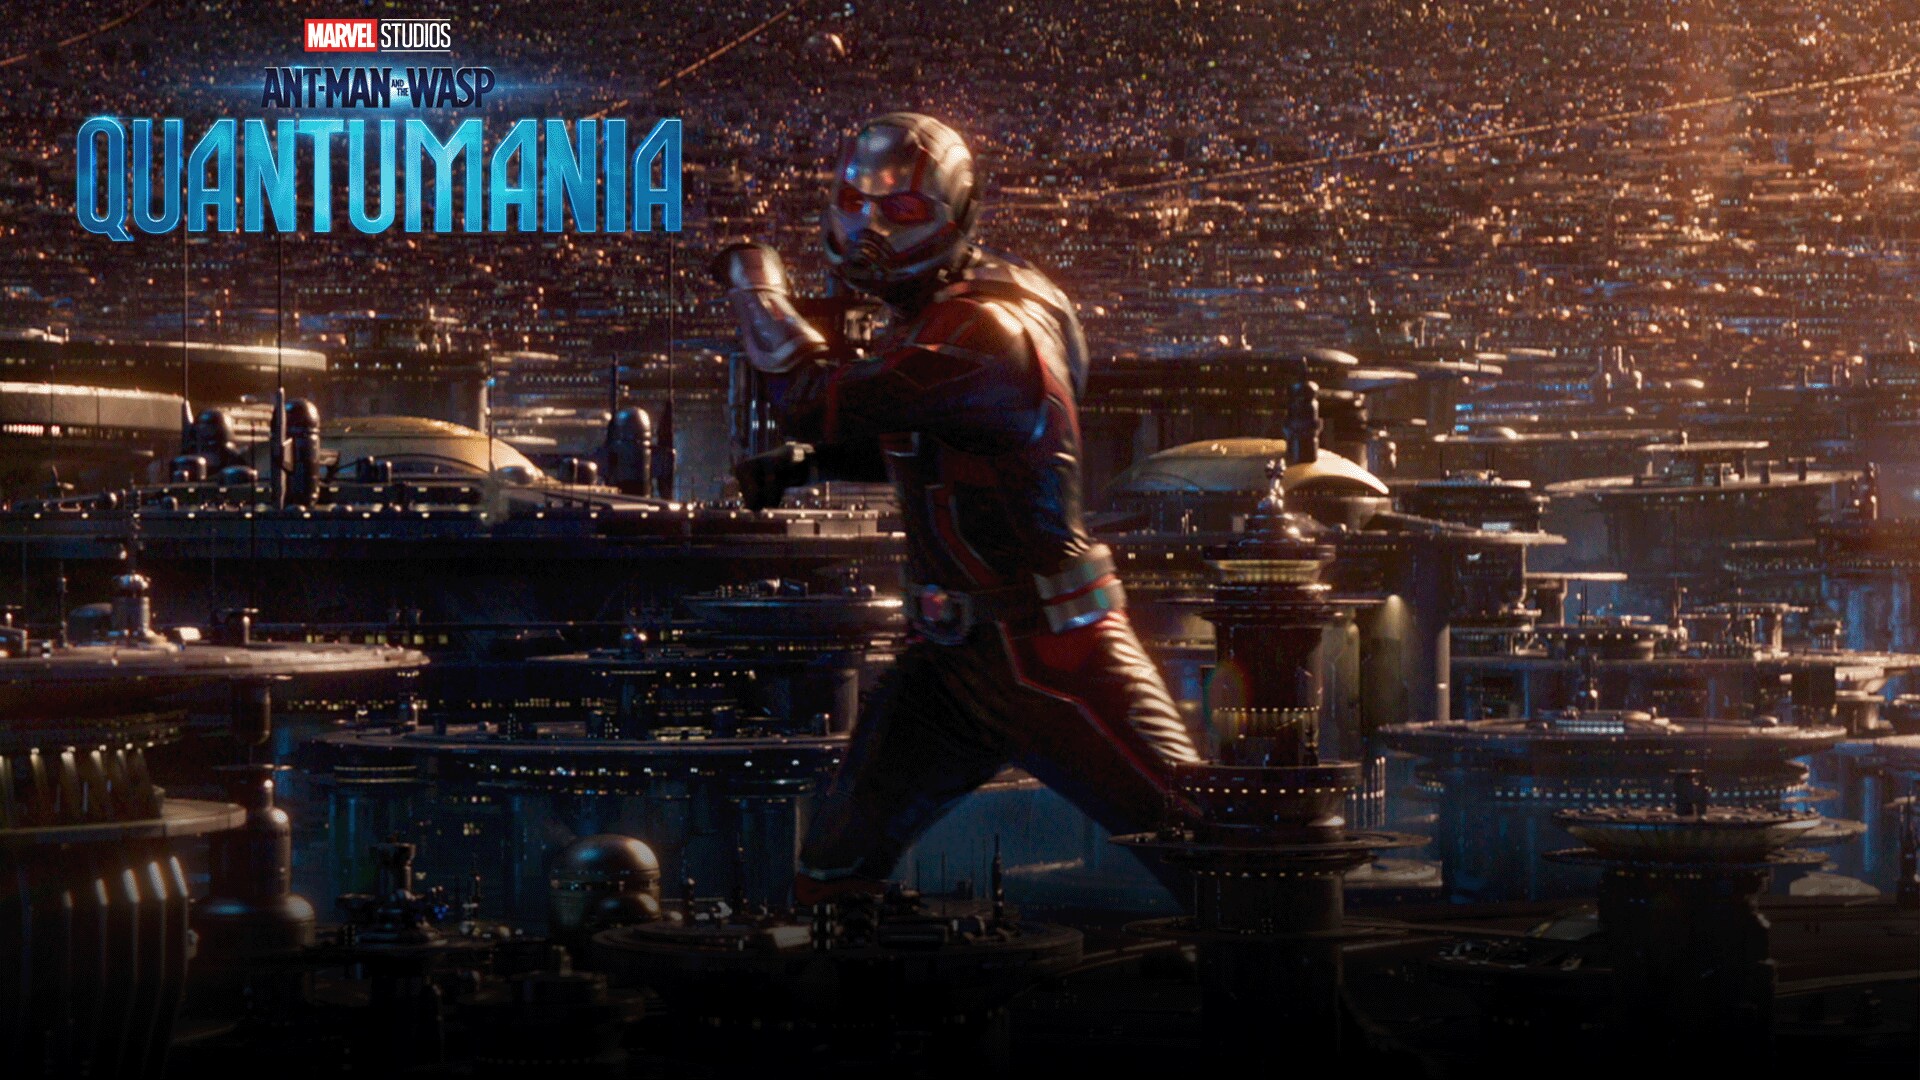 Marvel Studios’ Ant-Man and The Wasp: Quantumania | Holes